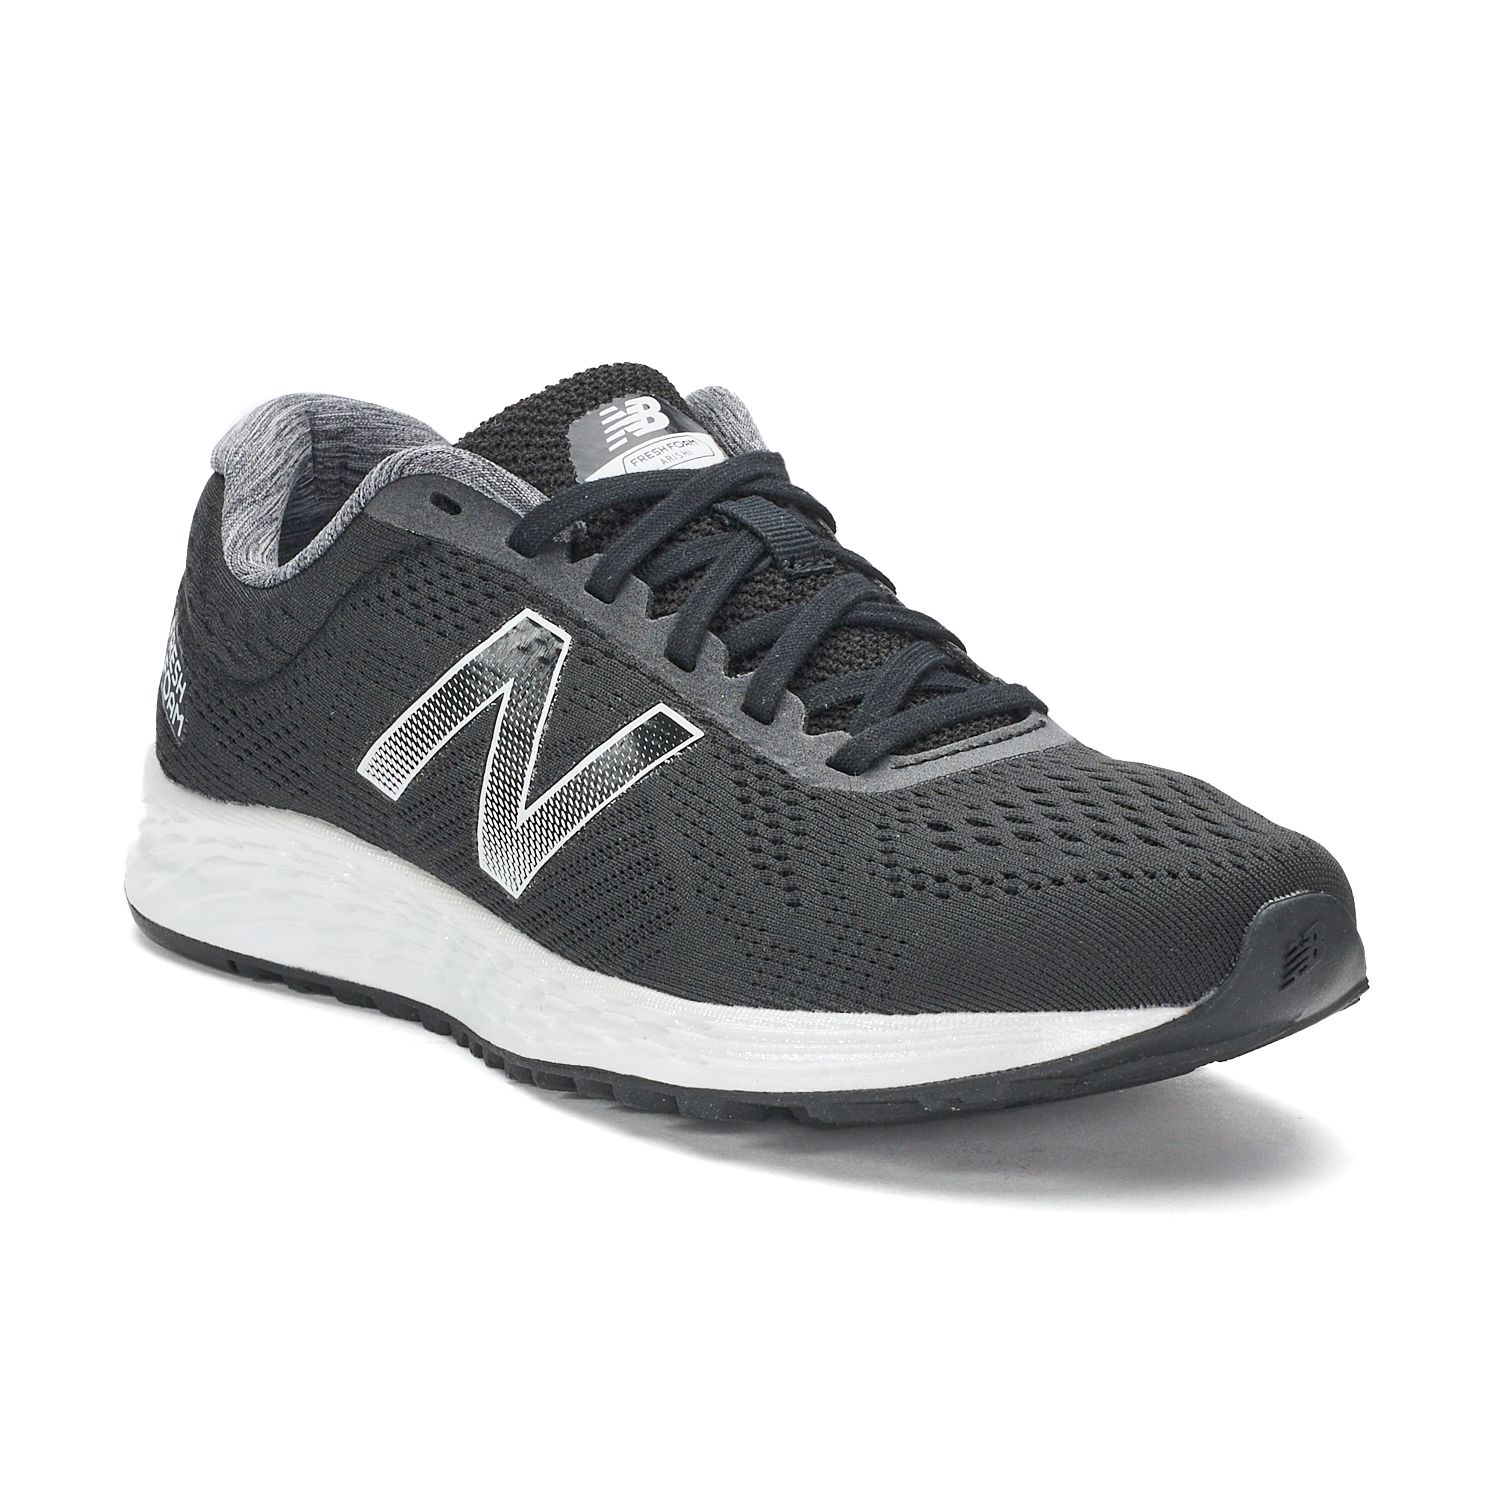 new balance warisrg1 reviews,Save up to 15%,www.ilcascinone.com